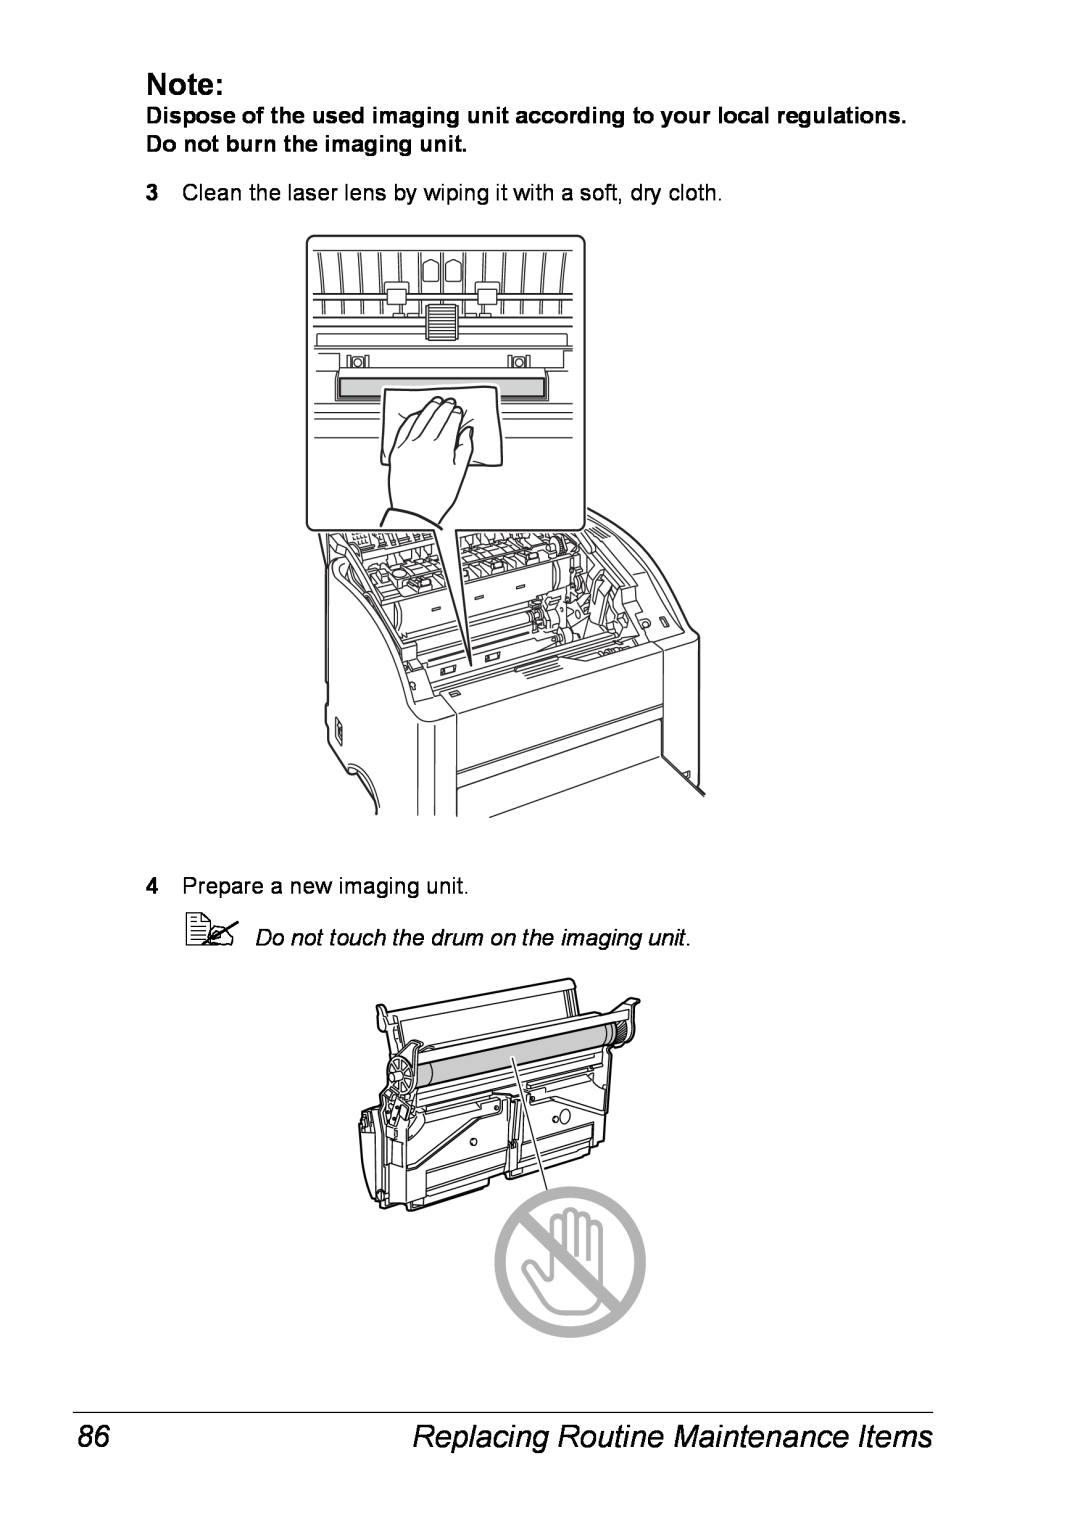 Xerox 6120 manual Replacing Routine Maintenance Items, Clean the laser lens by wiping it with a soft, dry cloth 